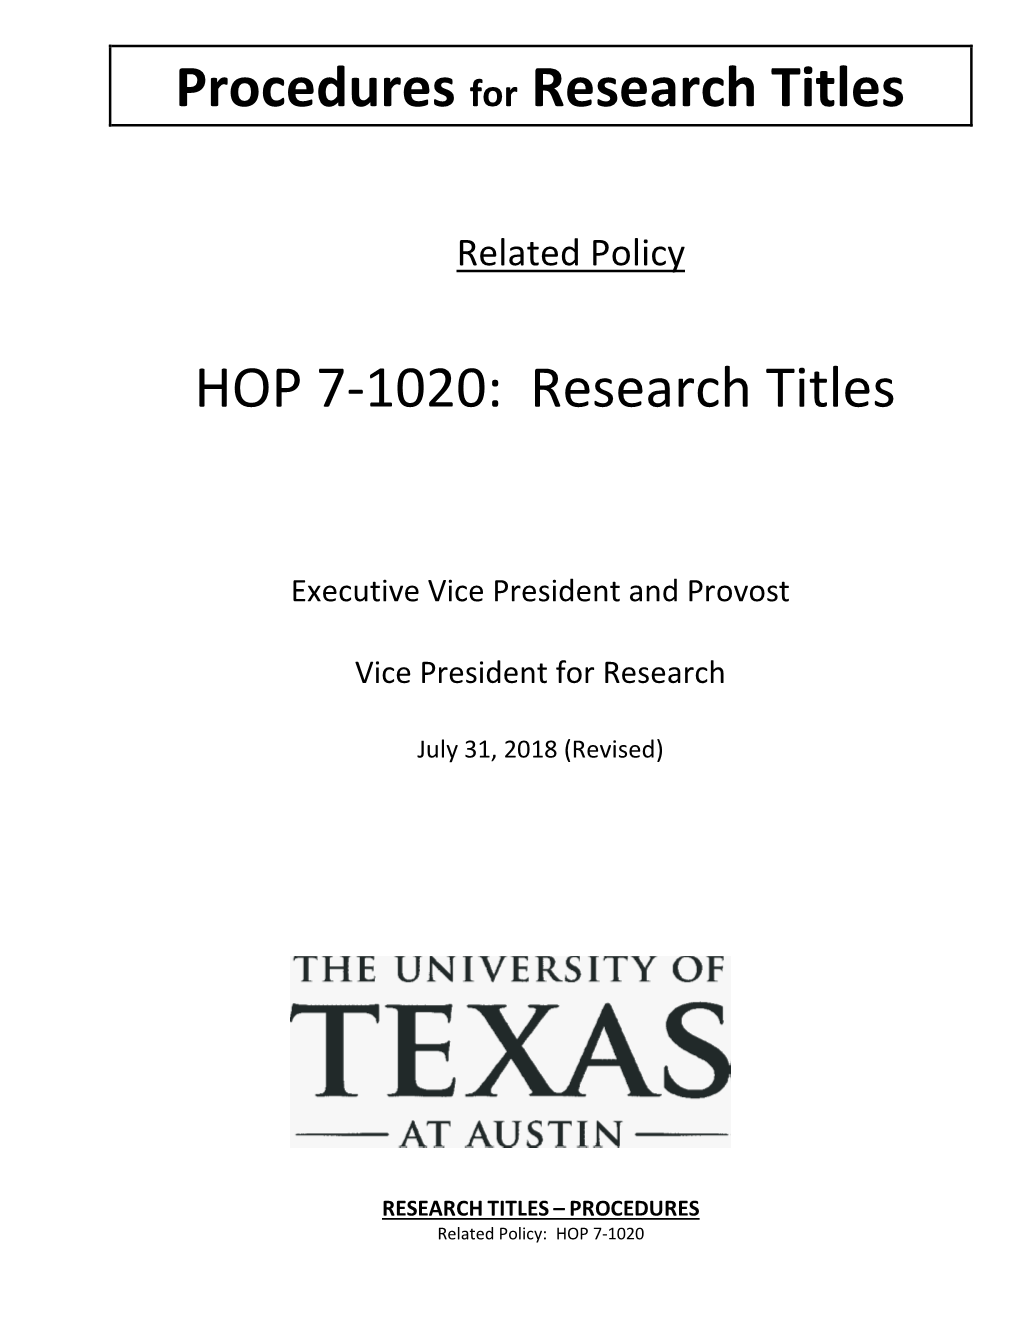 Procedures for Research Titles HOP 7-1020